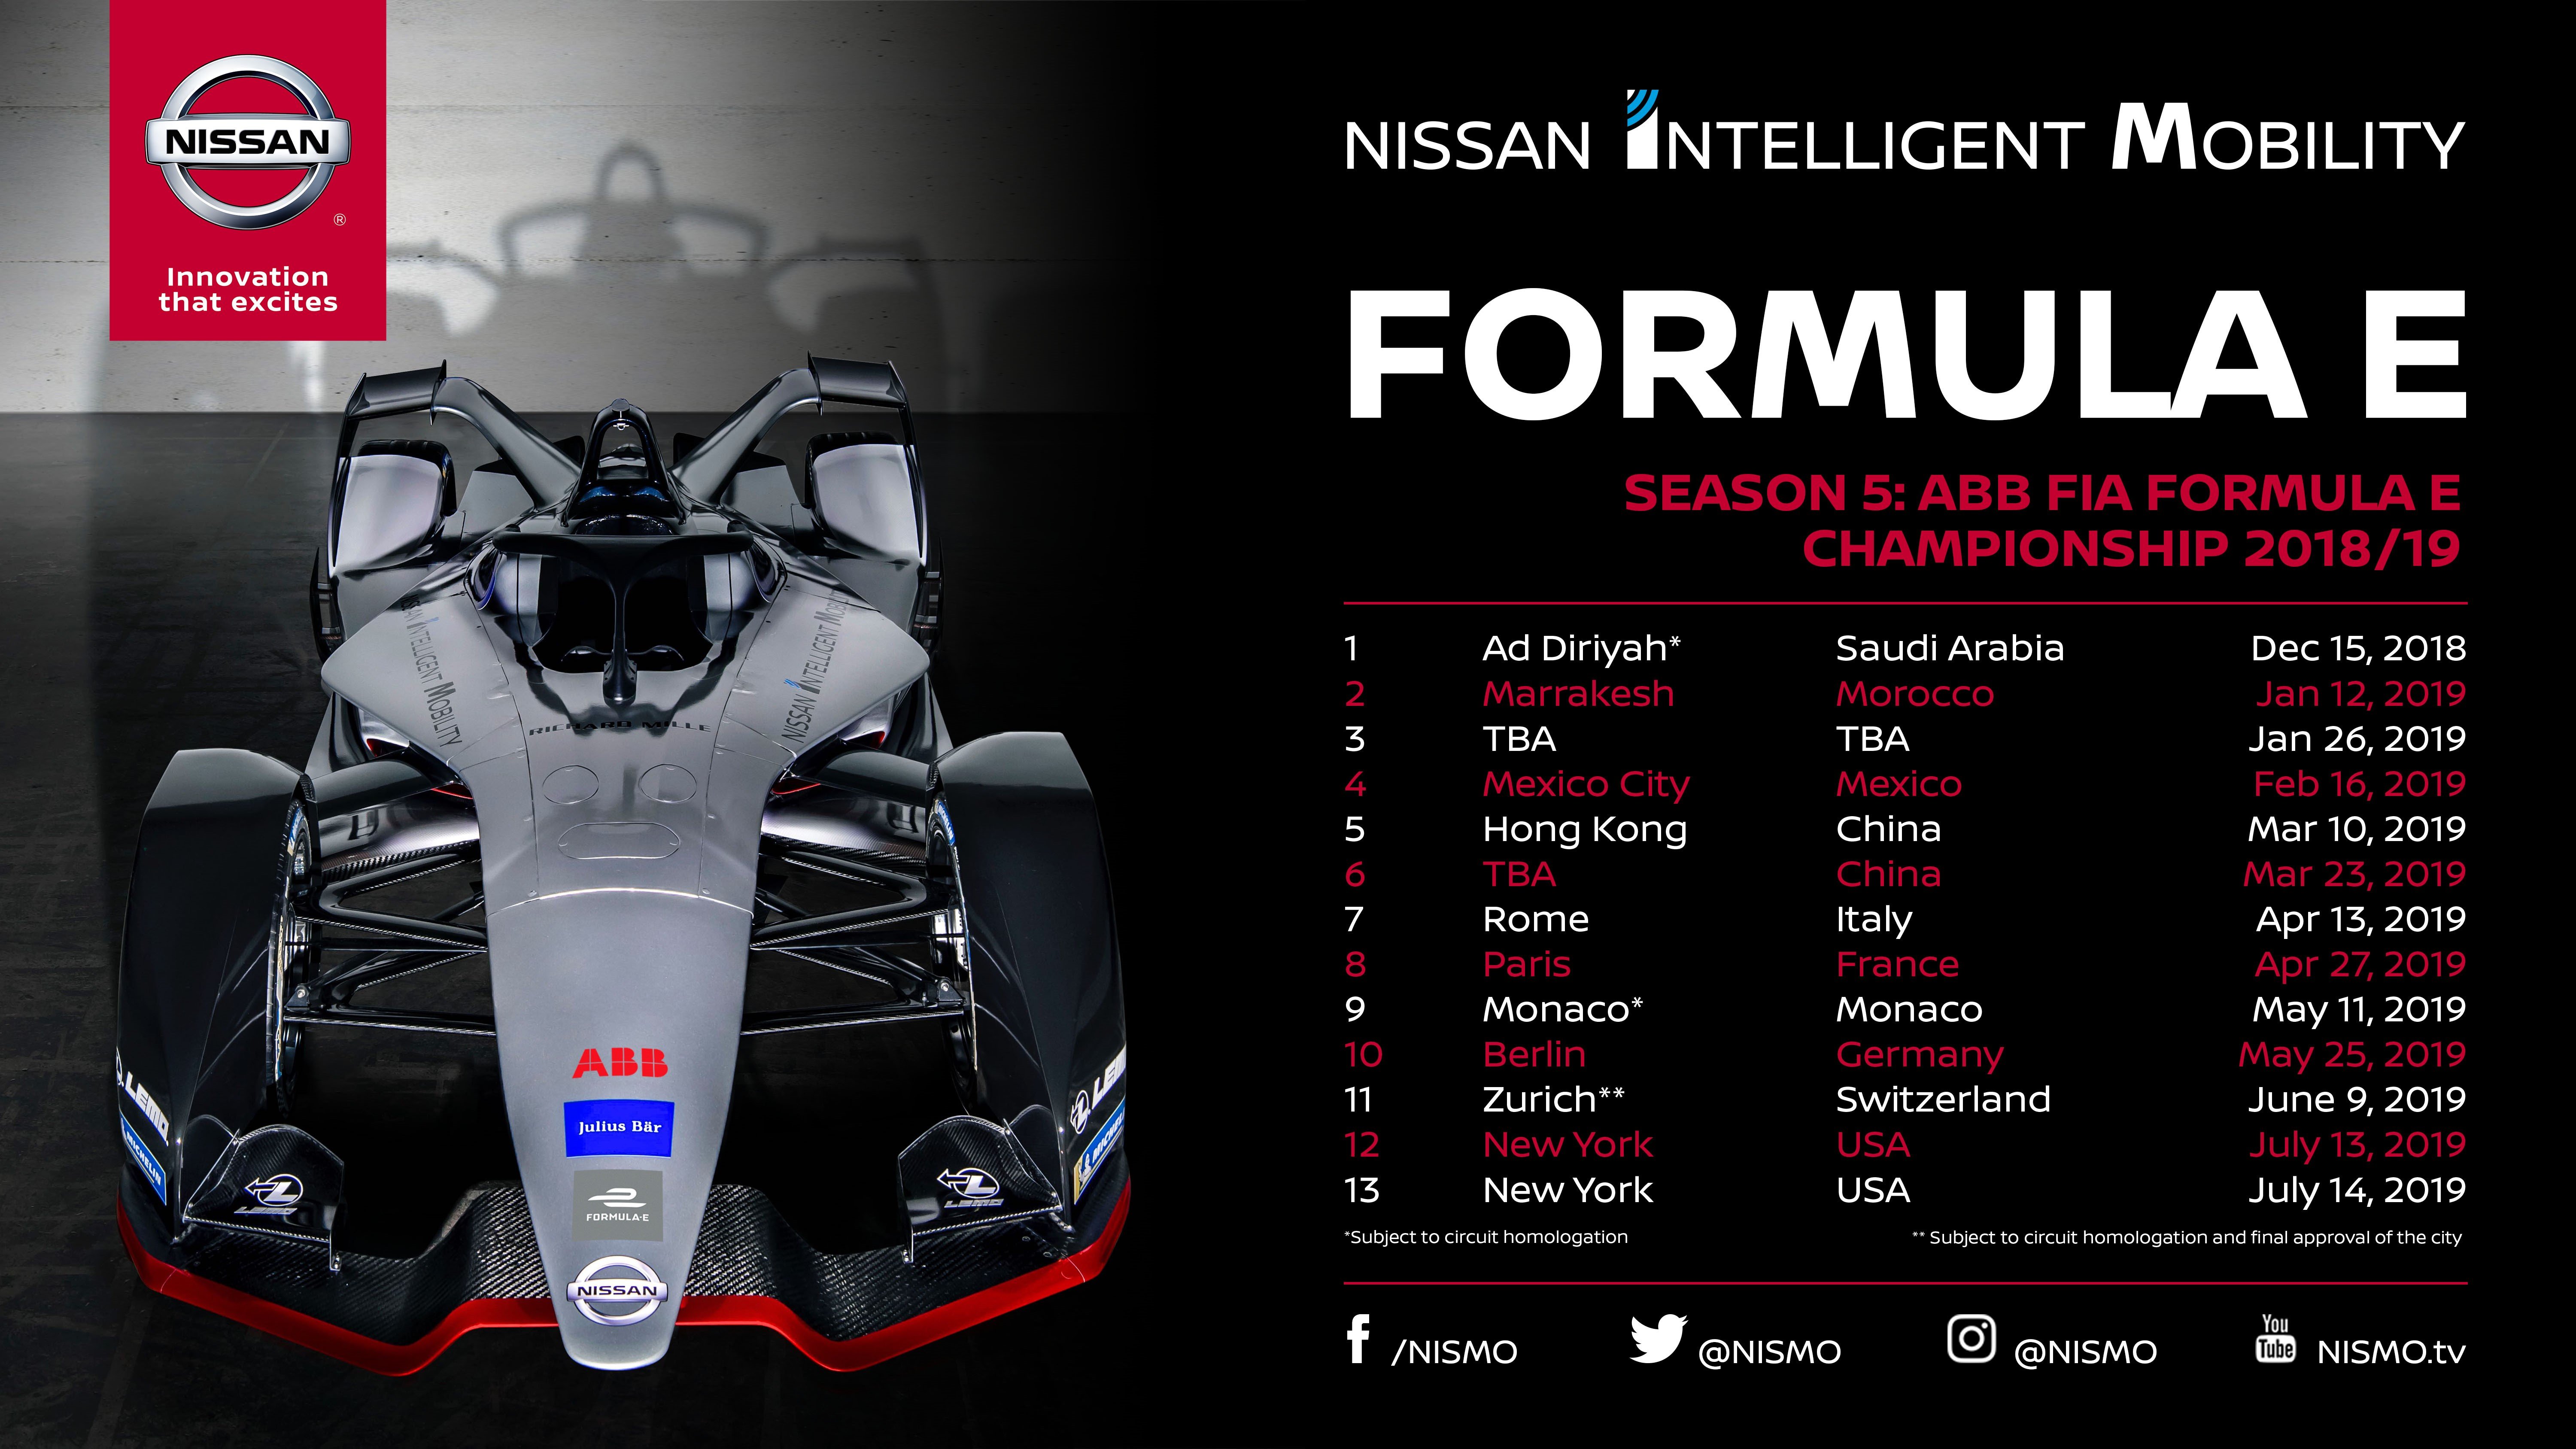 Nissan Will Race 12 Cities In Season 5 of Formula E Drive Safe and Fast